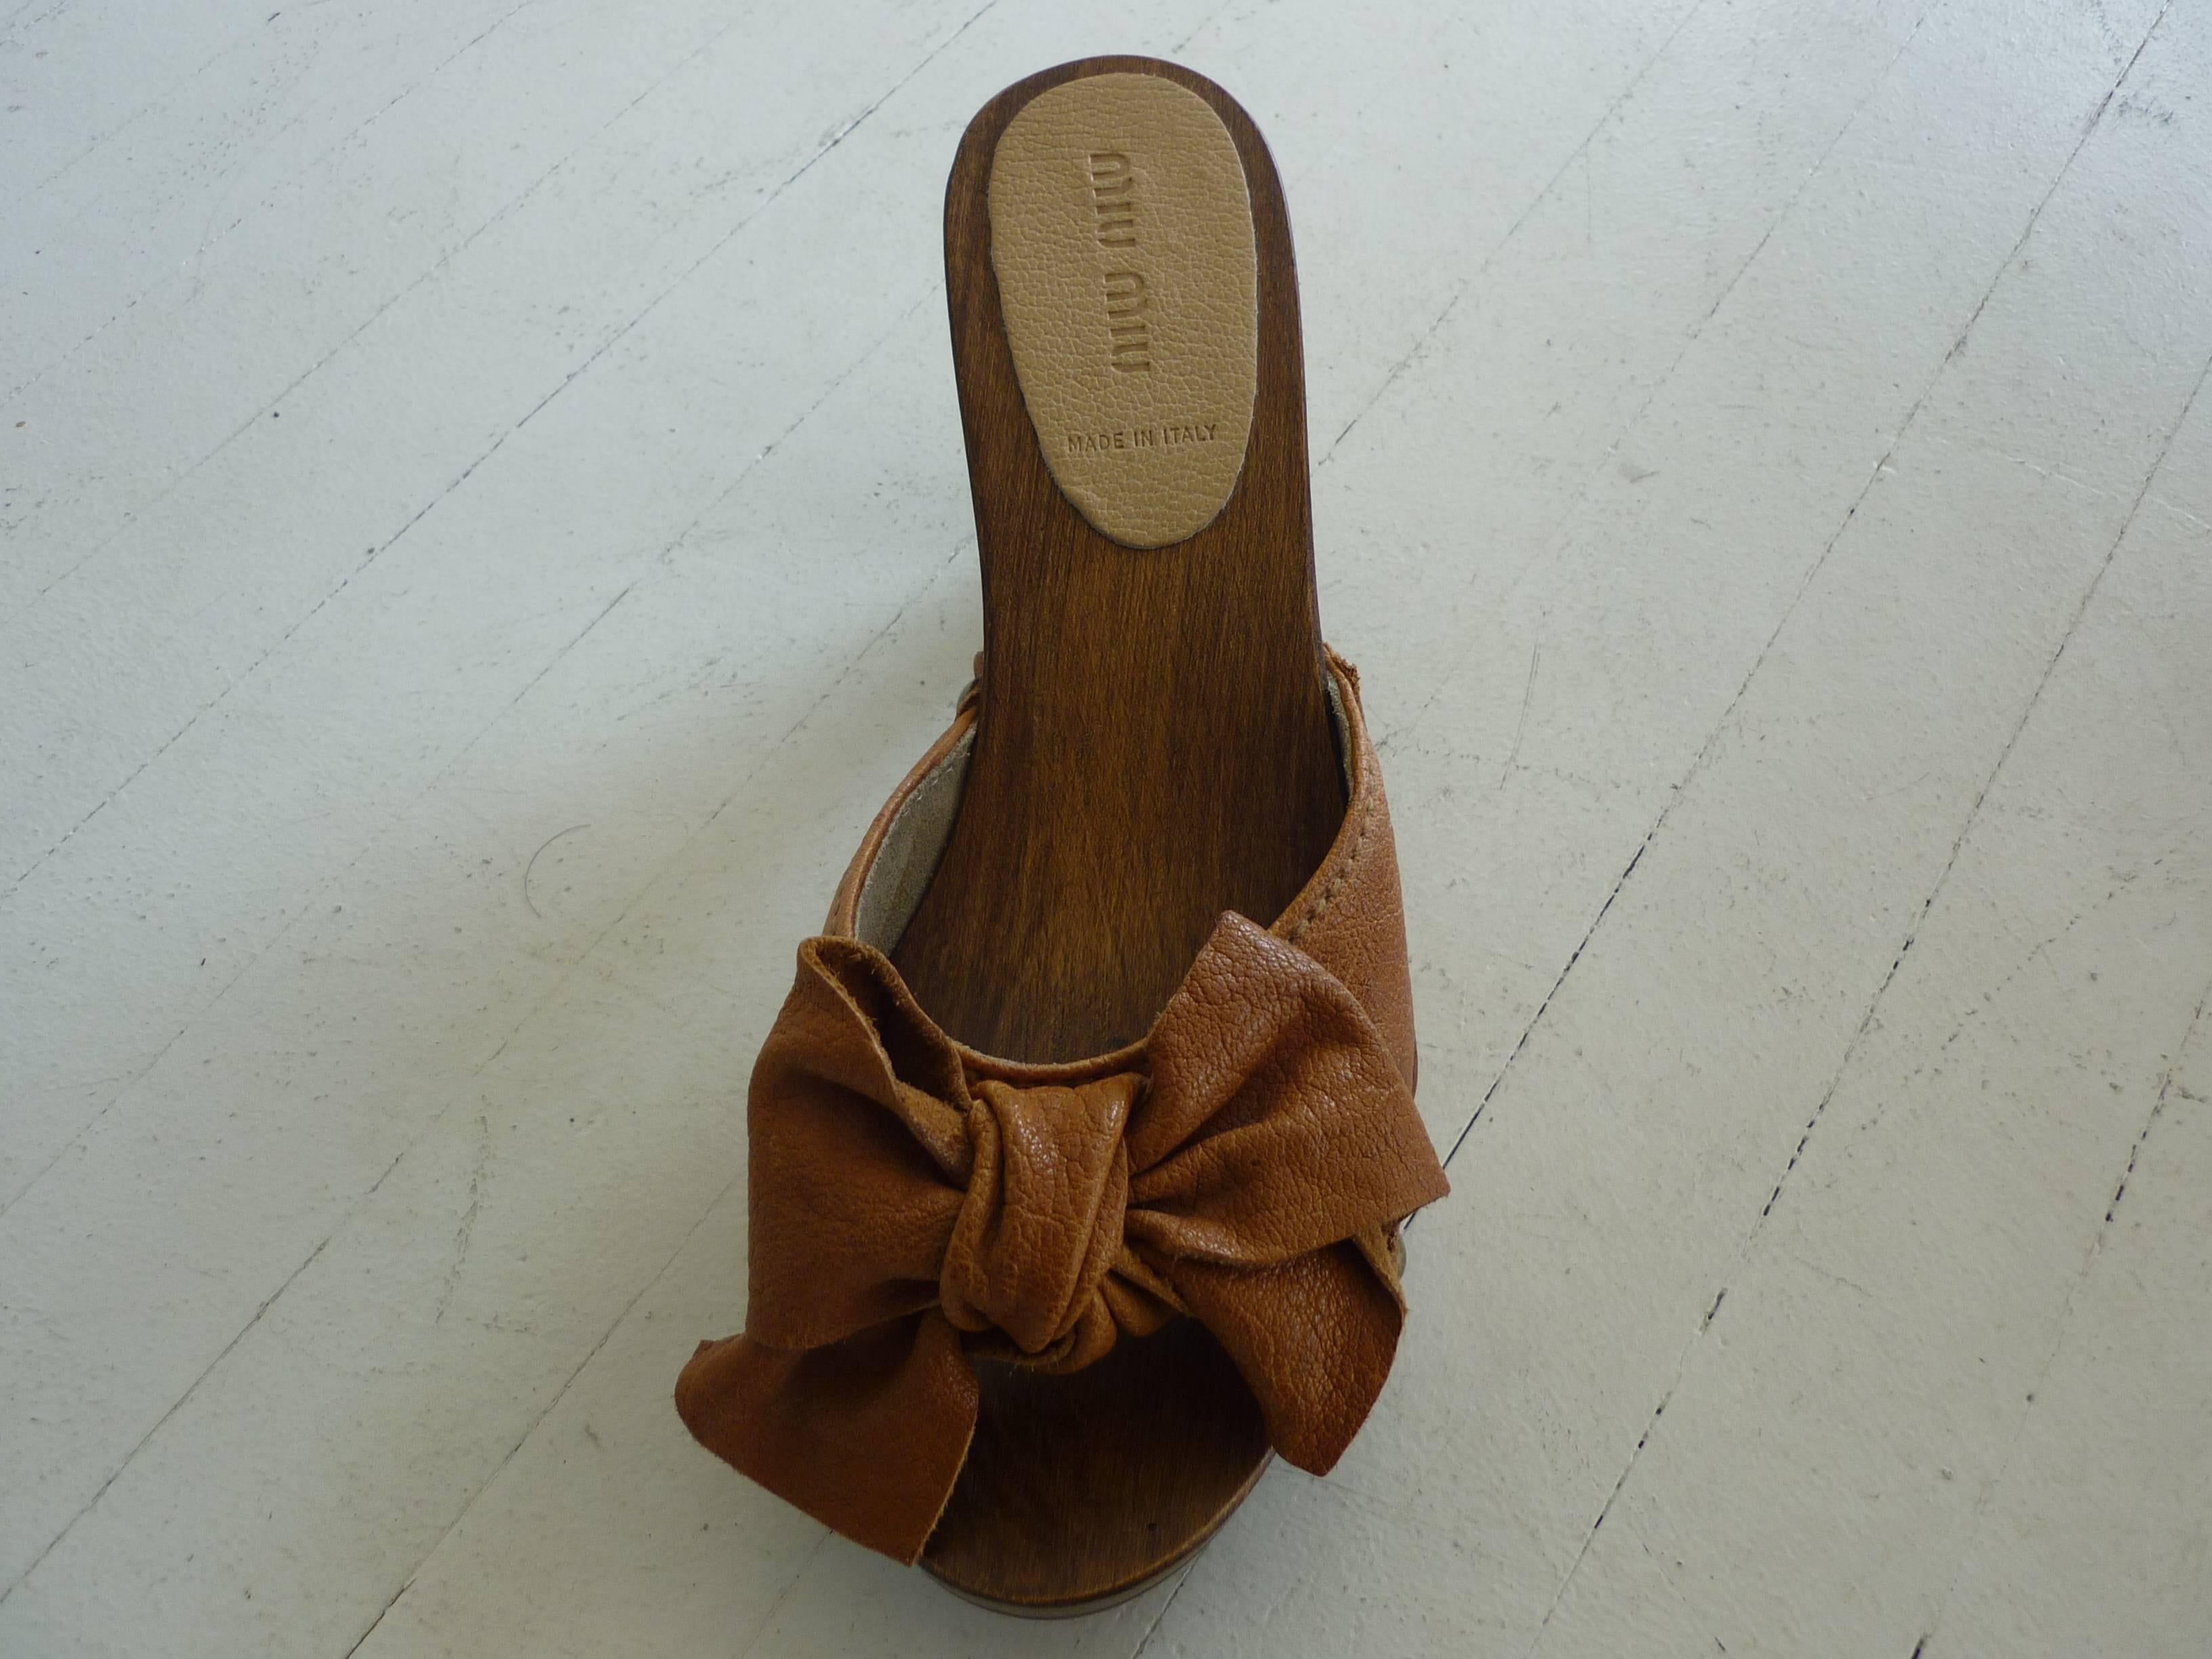 Nice solid wooden base and heels with bowed and stud embellishments. These sandals are in excellent condition.

3